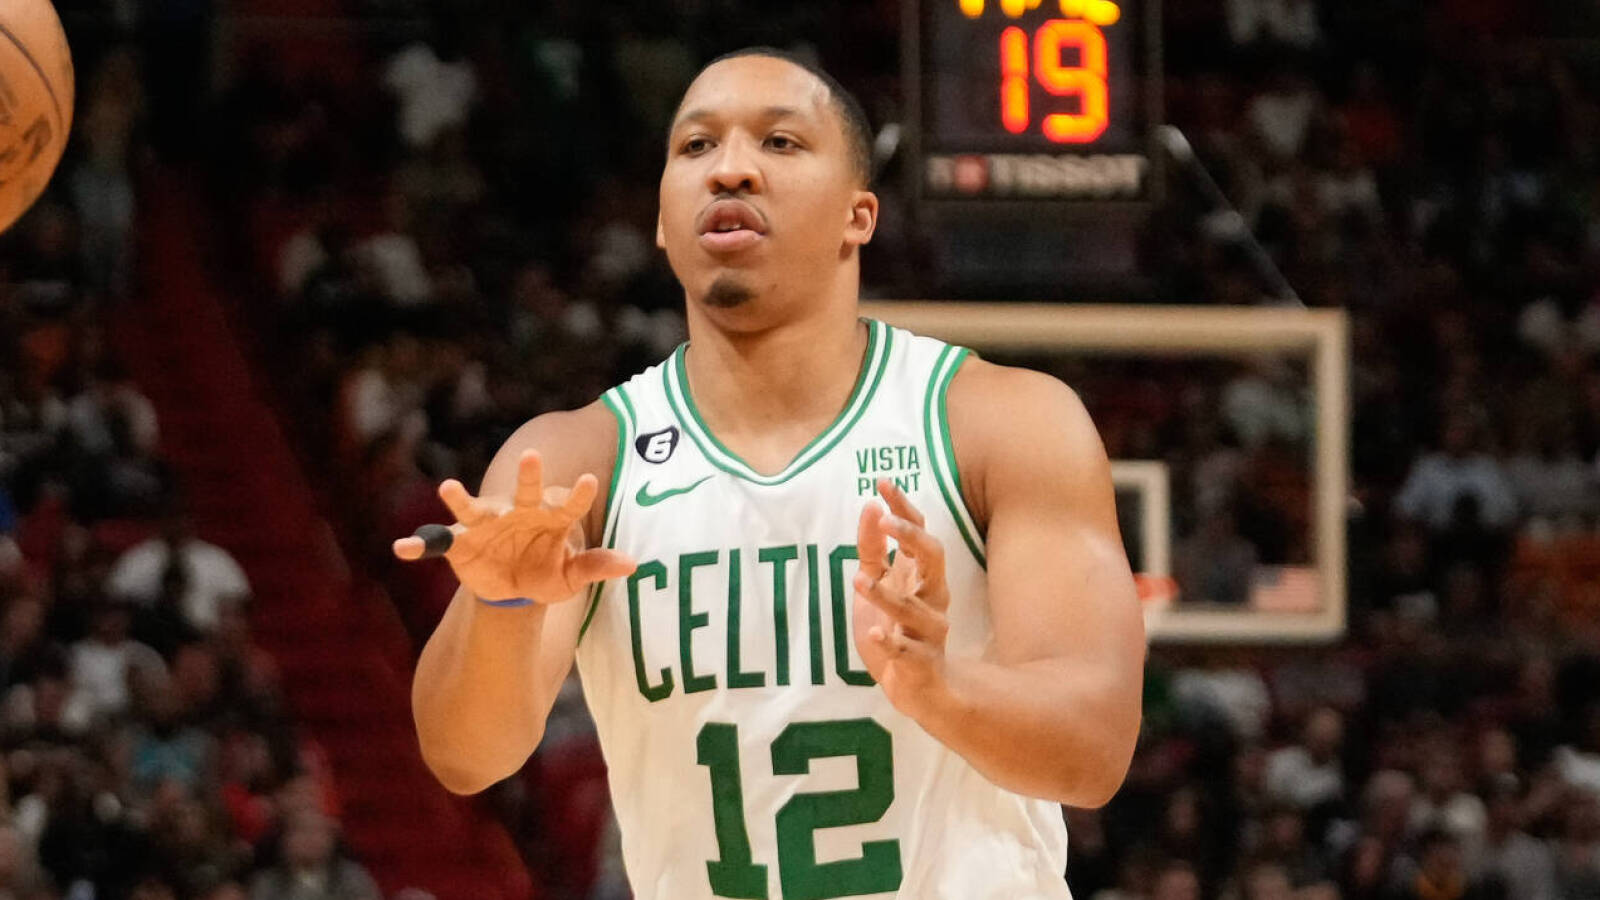 Celtics' Grant Williams suspended one game for bumping official